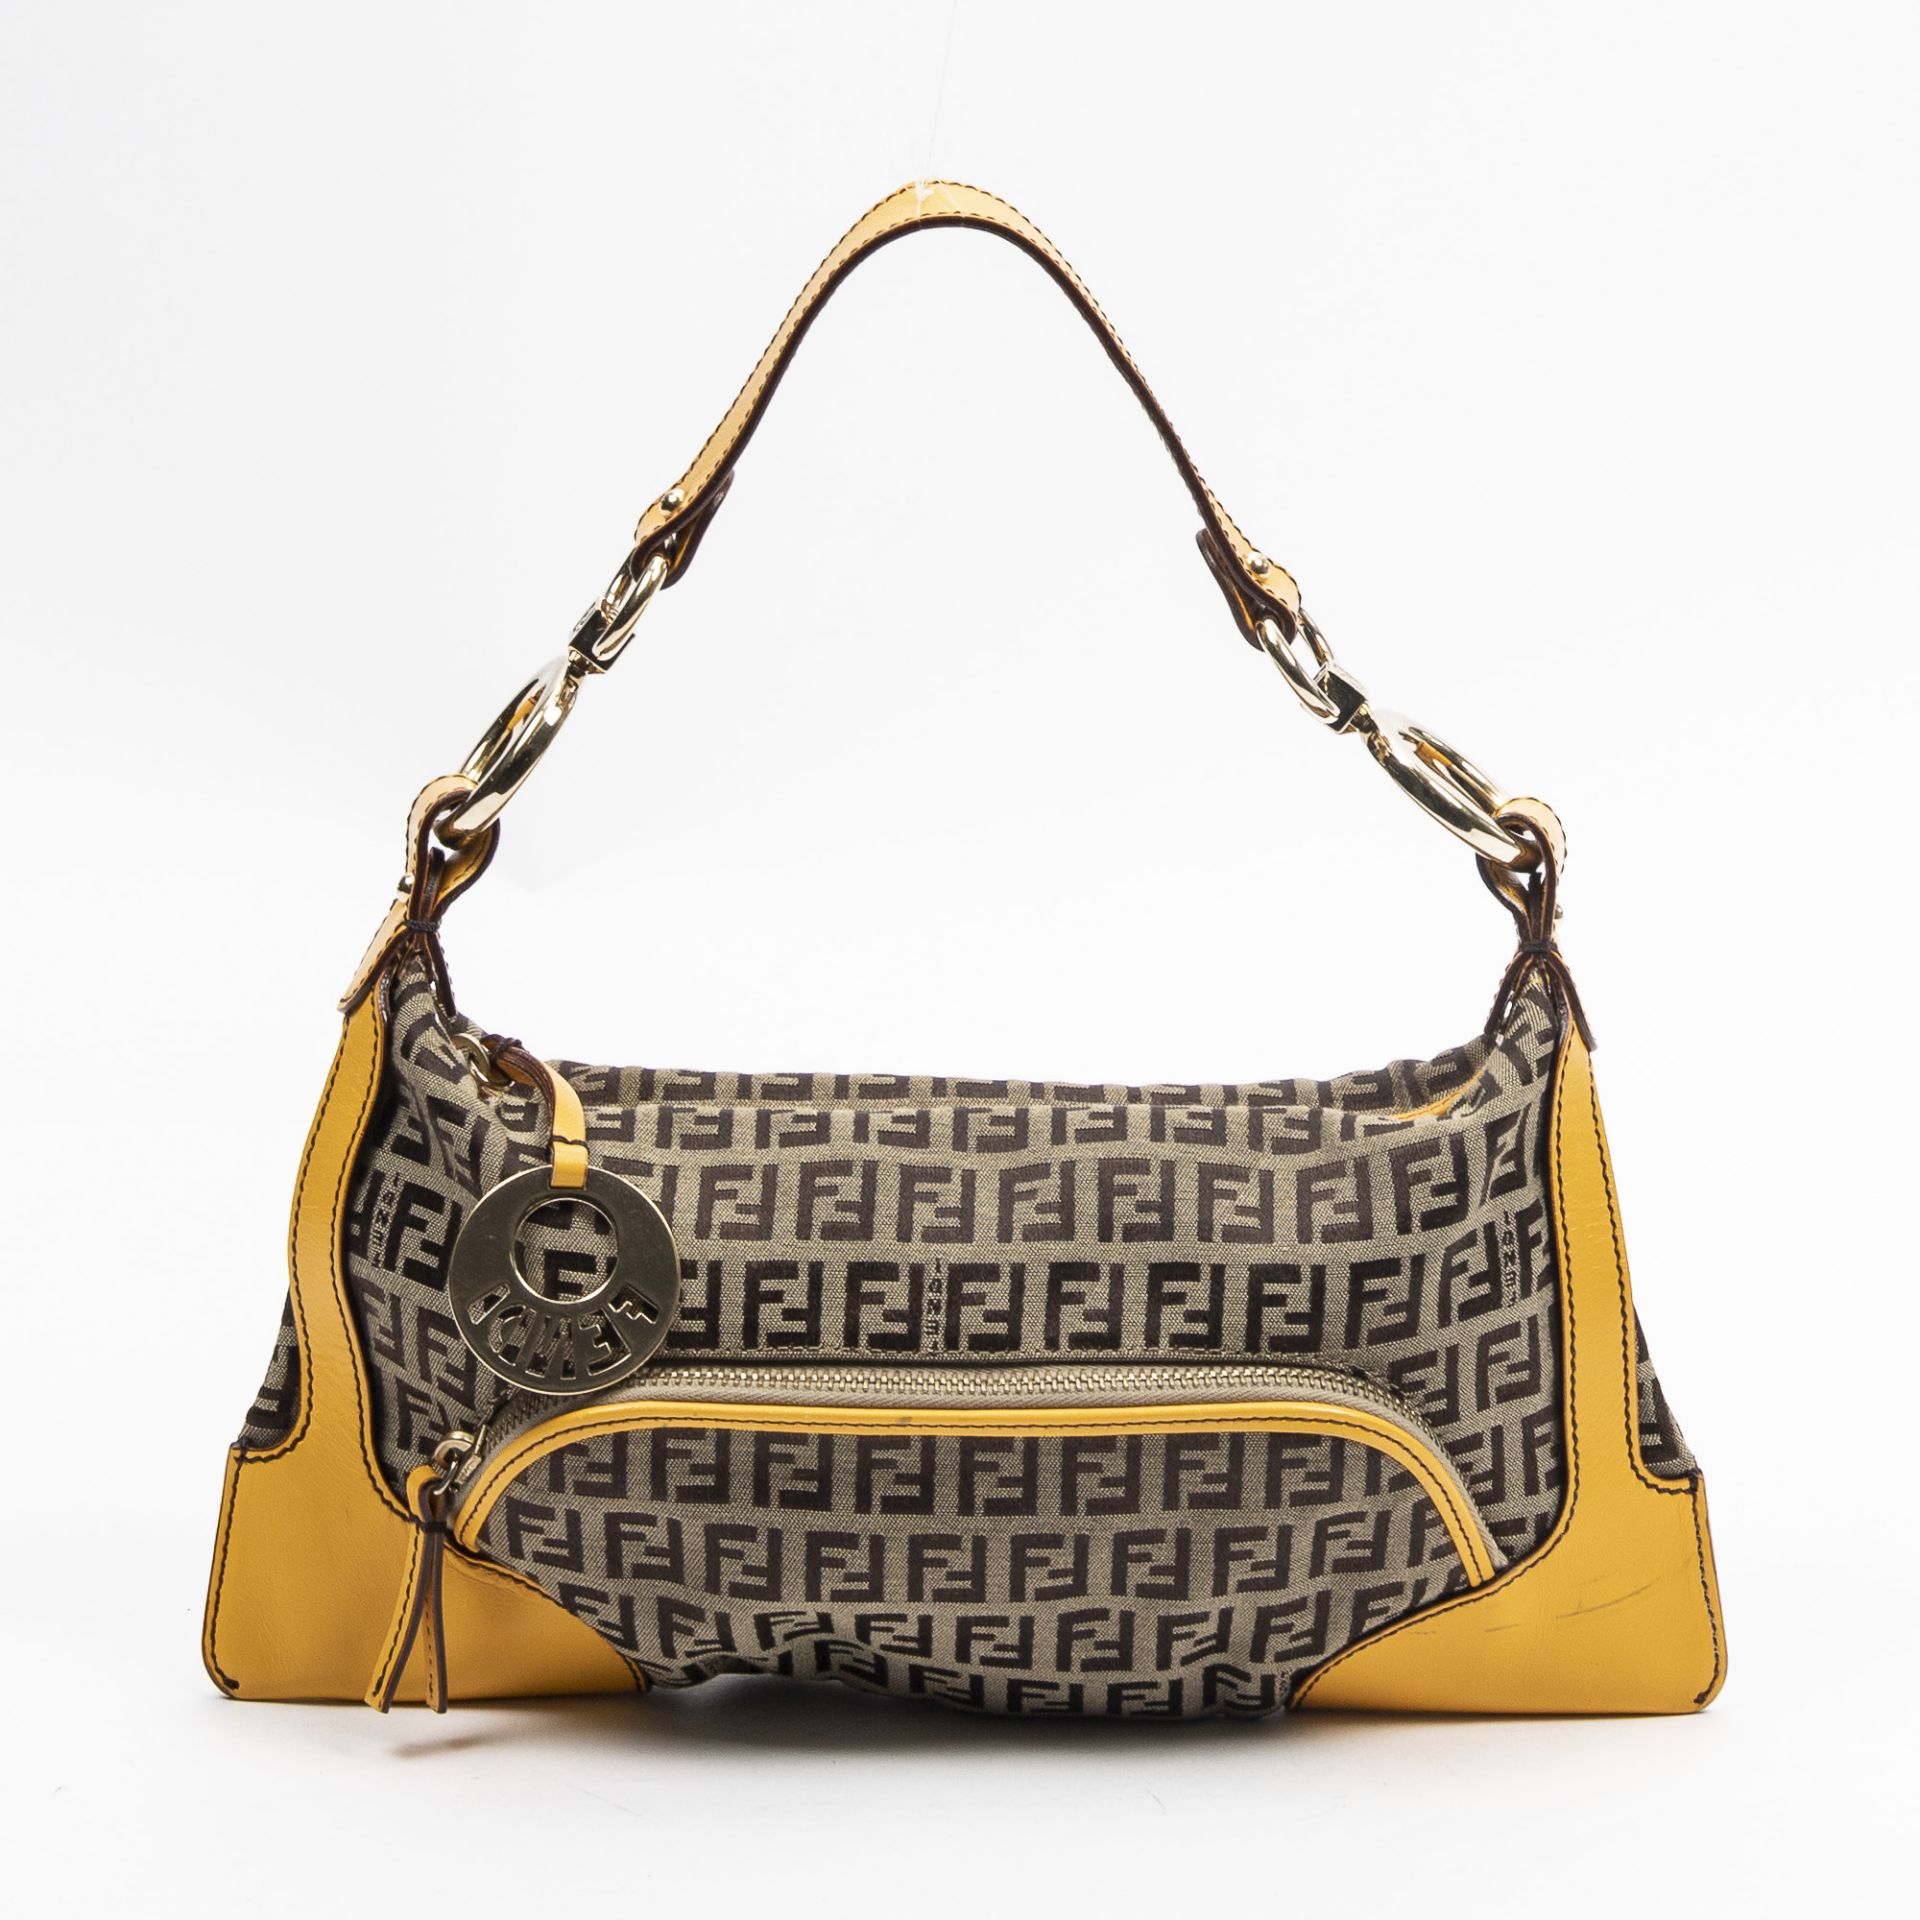 RRP £1,350.00 Lot To Contain 1 Fendi Canvas Mini Front Zip Shoulder Tote Shoulder Bag In Brown/